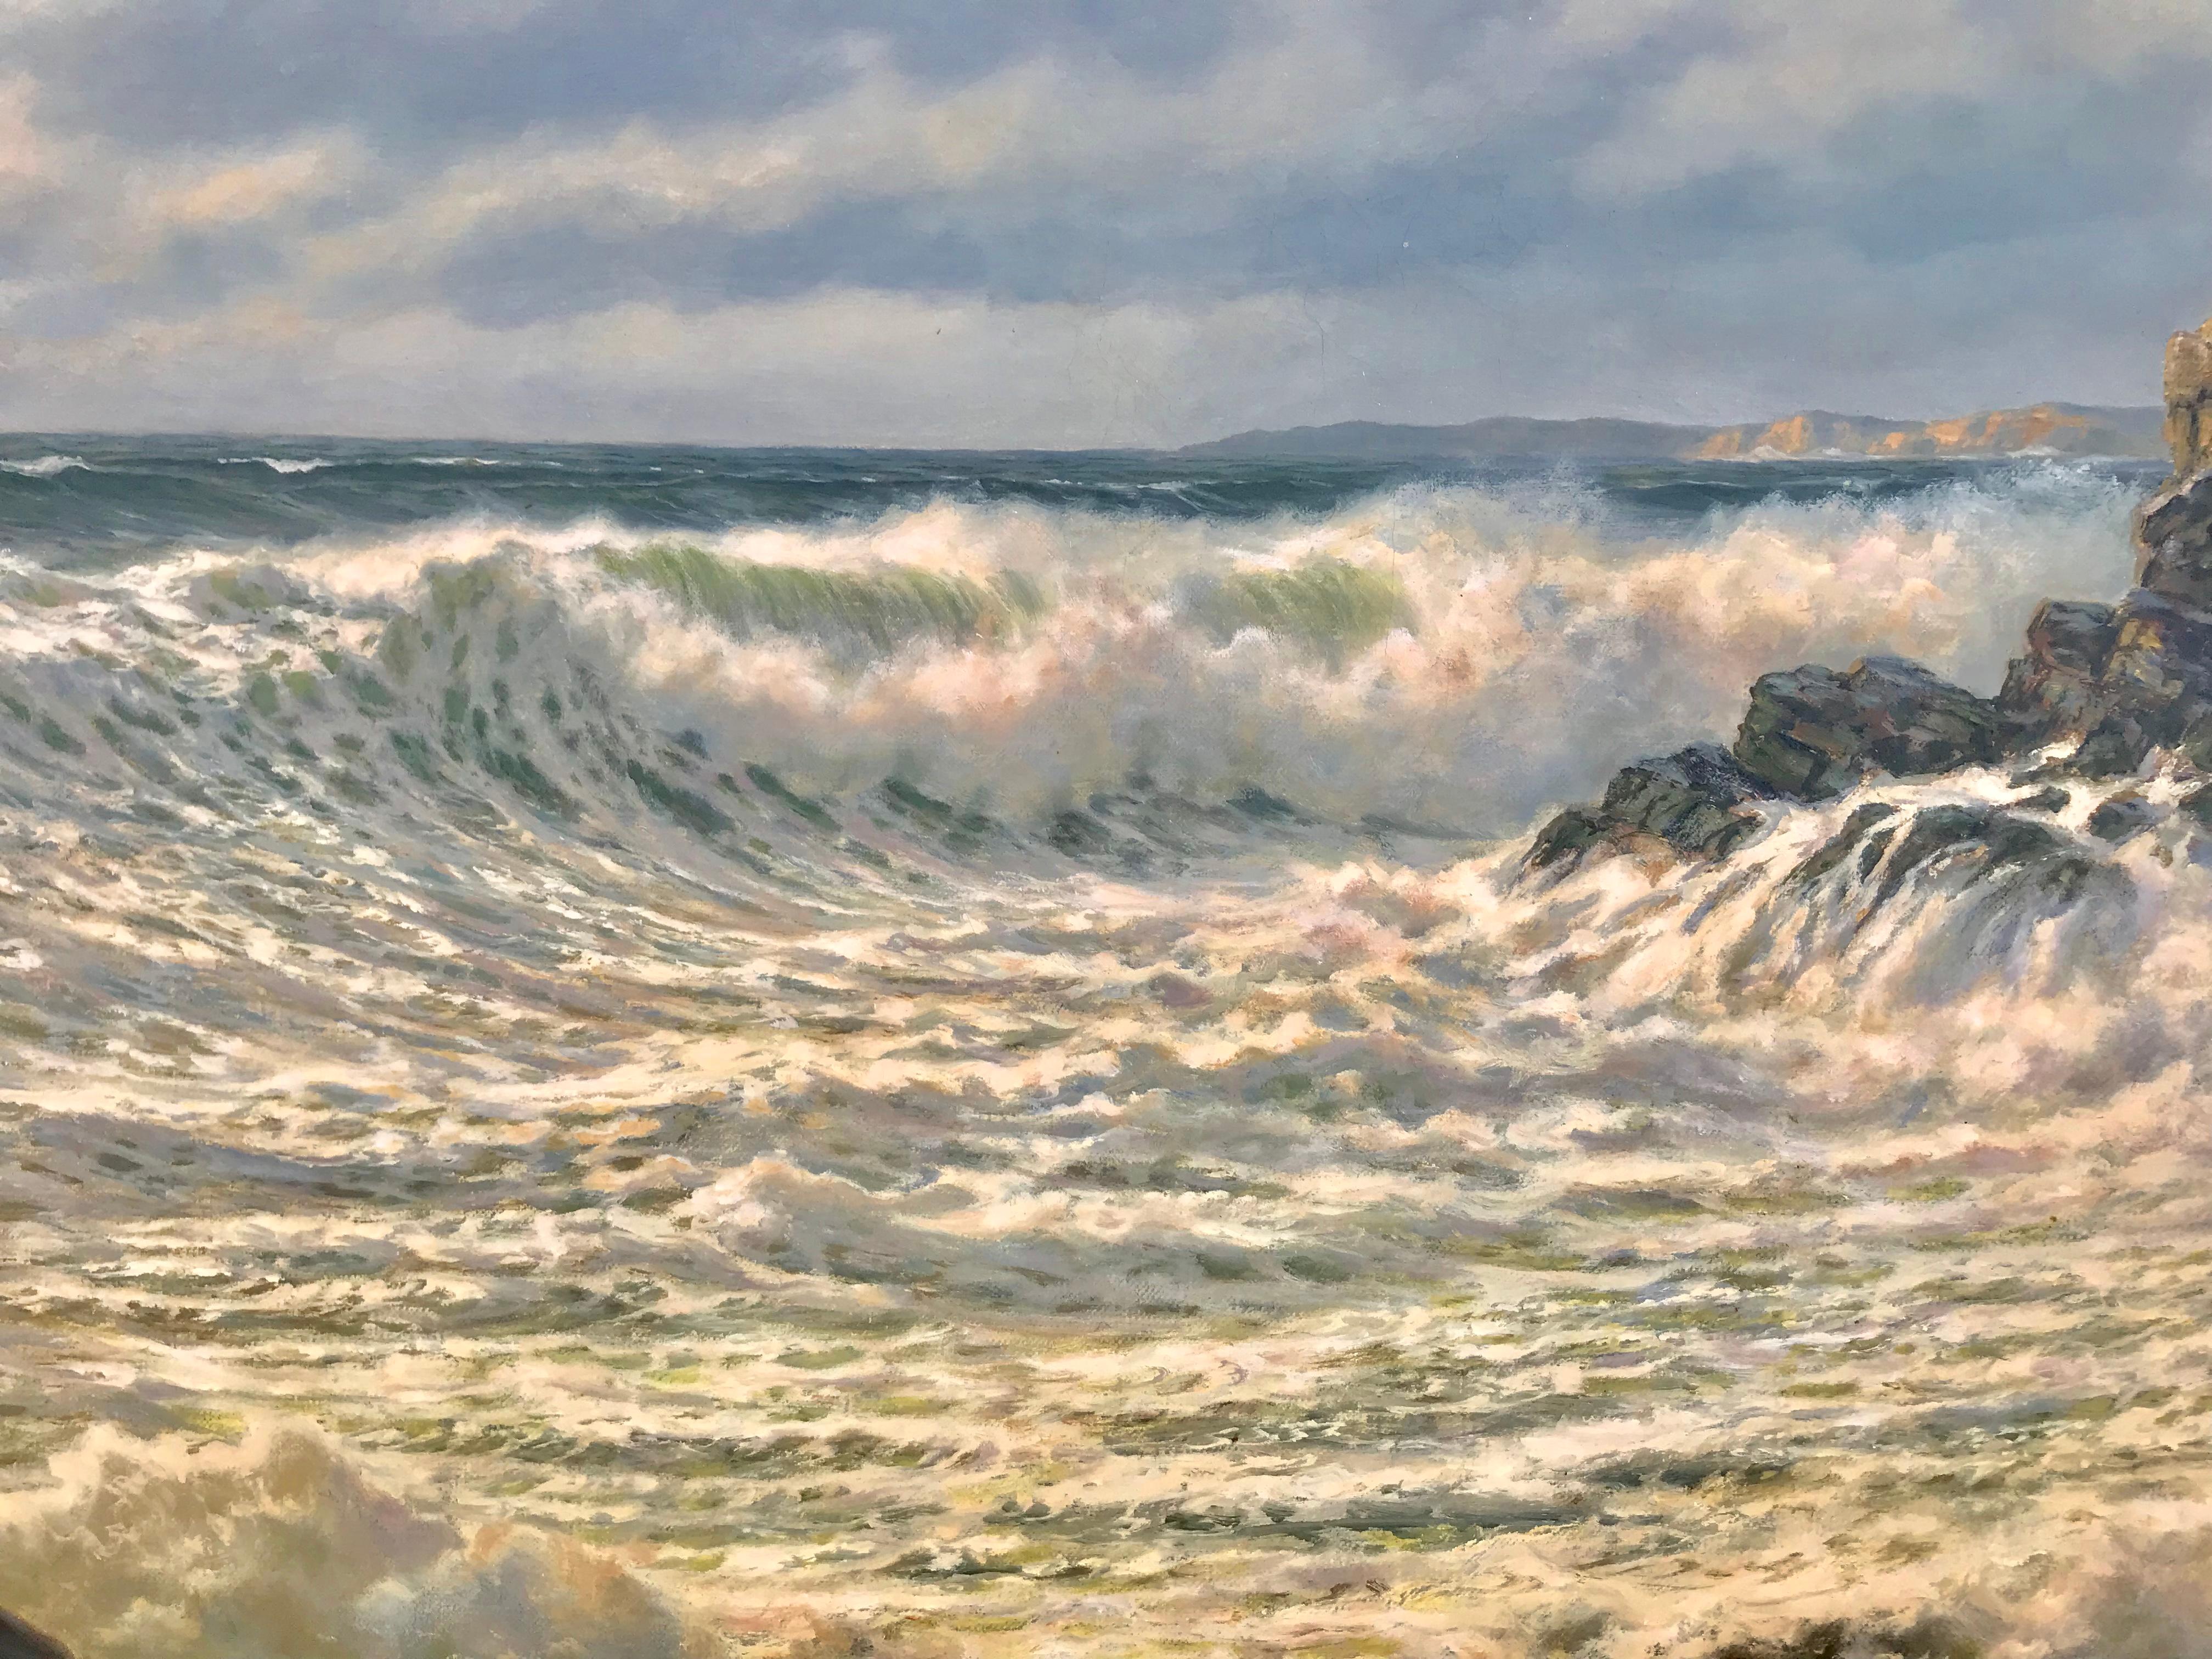 “Incoming Surf” - Painting by Josef M. Arentz